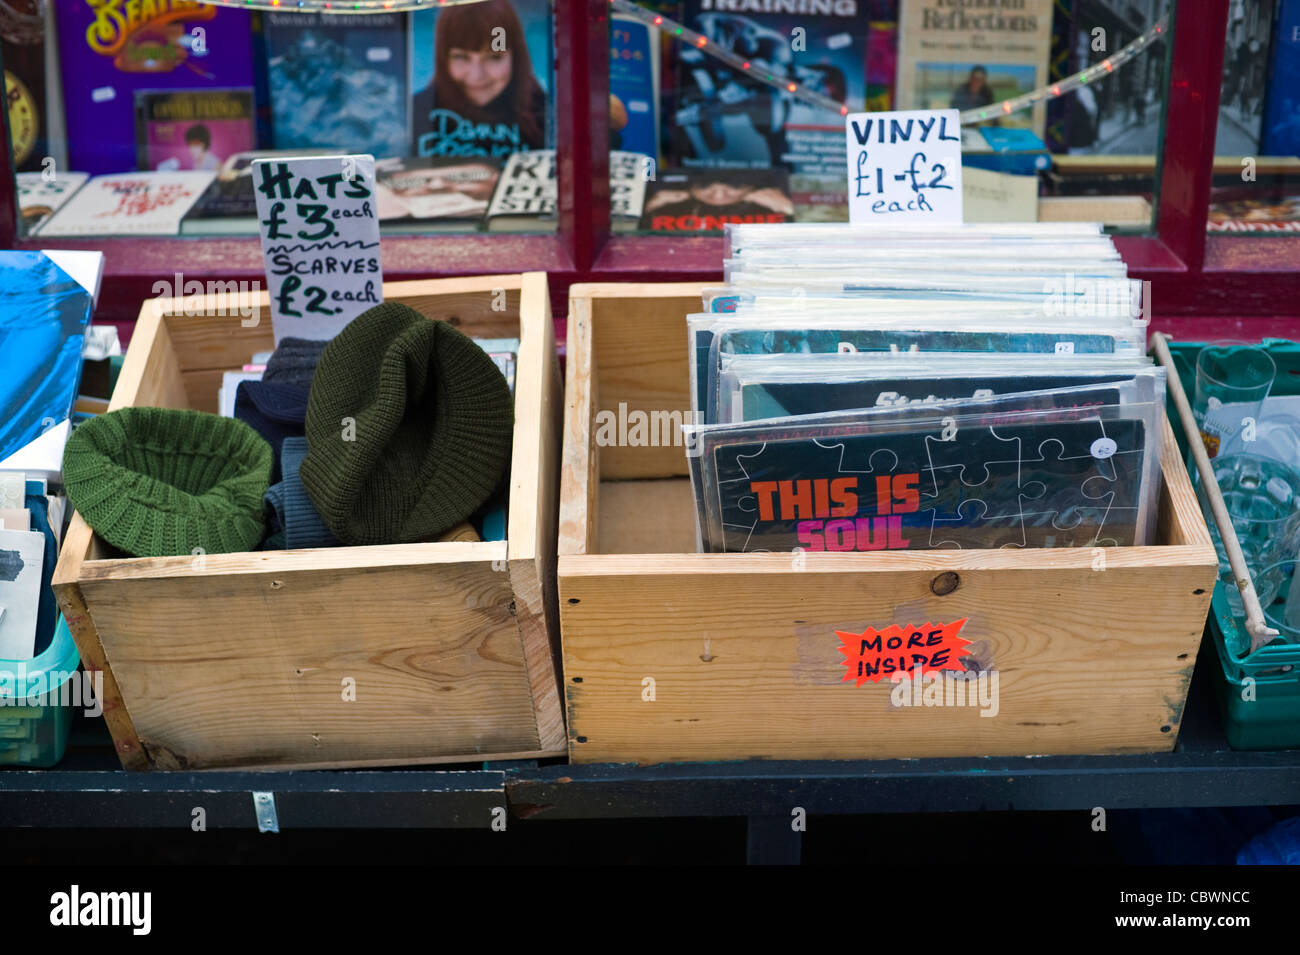 Cheap bargain box of hats scarfs and vinyl LPs for sale outside shop in  Hay-on-Wye Powys Wales UK Stock Photo - Alamy